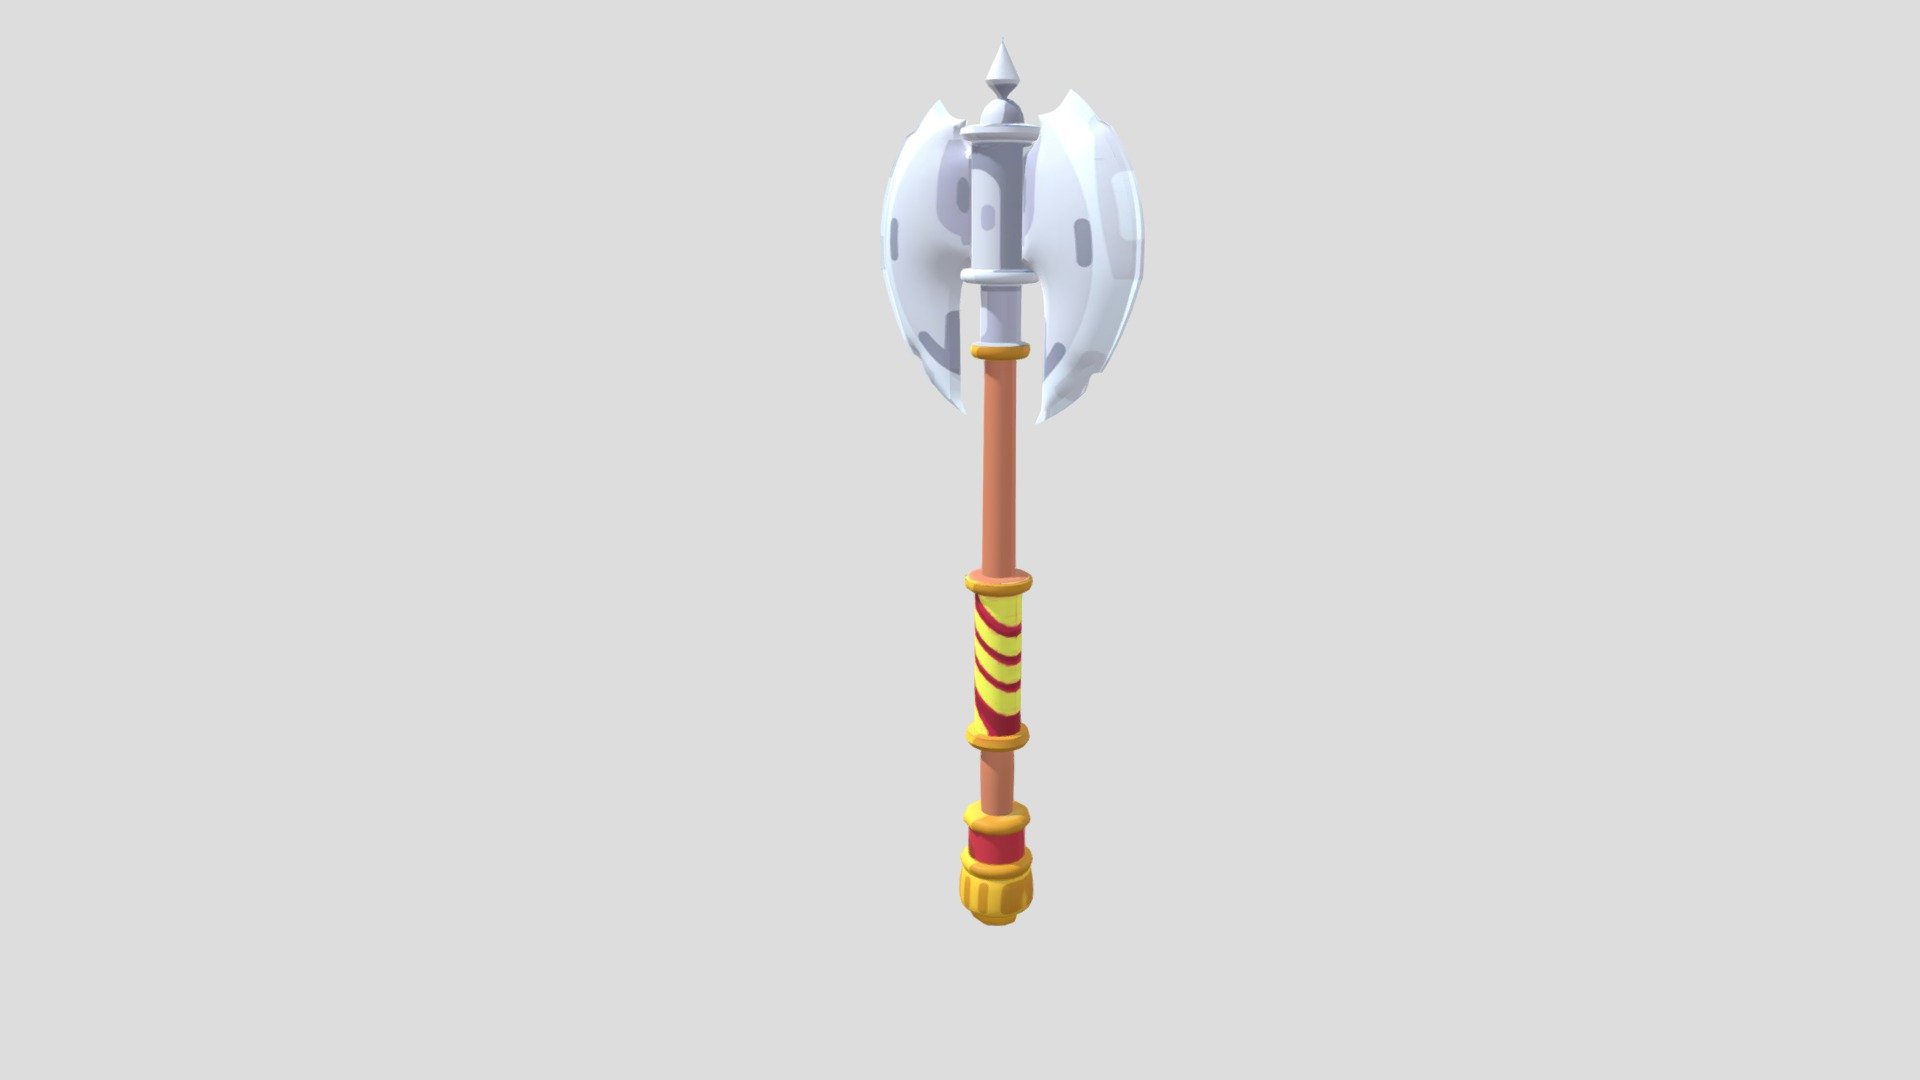 Cartoon Axe for War renders, games and animations. The topology might not be good, but I think will be good enough to fill your game, or any 3d scenes. I hope you will like this model. Please use it wisely 3d model